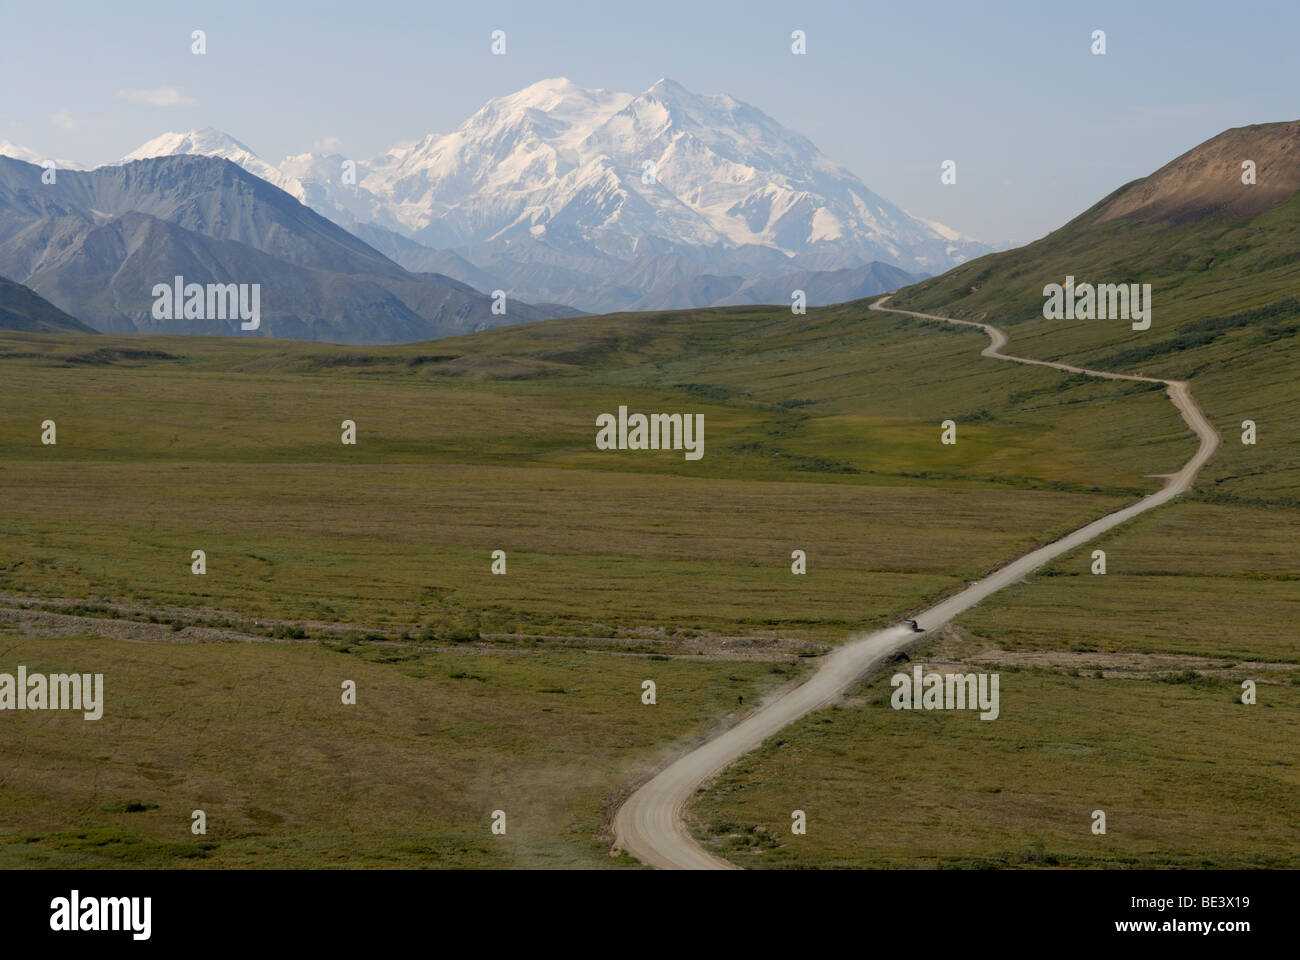 Backcountry road, Denali, Alaska with one car leaving a dust trail Stock Photo